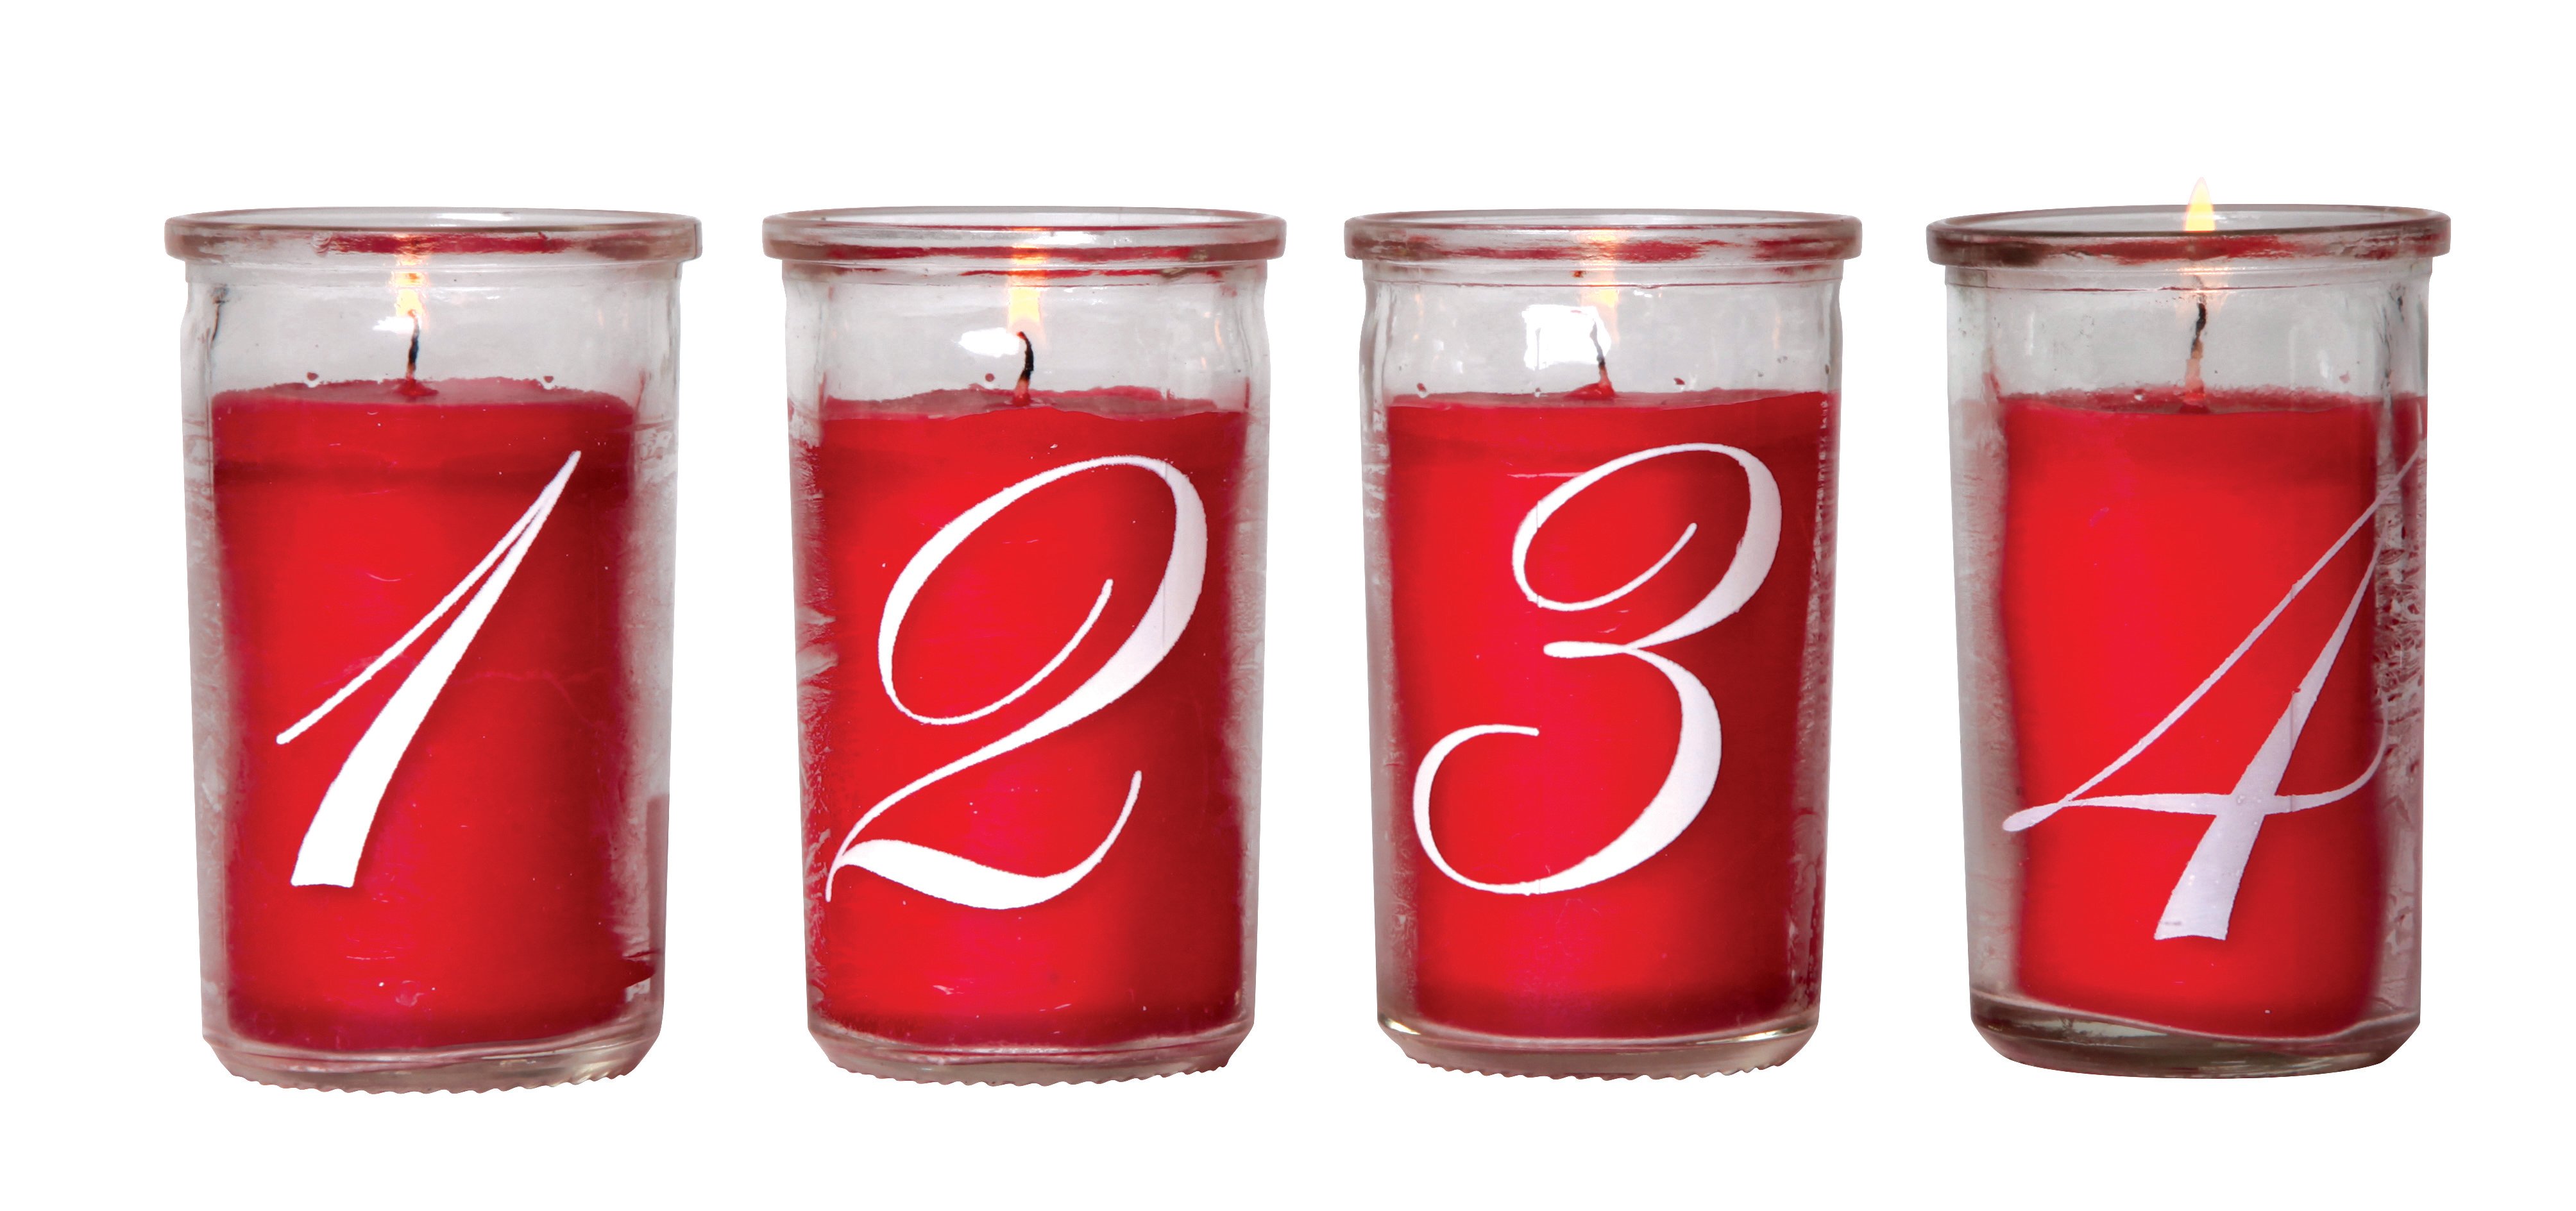 DGA - Advent Candles in glass - Red (12651008)